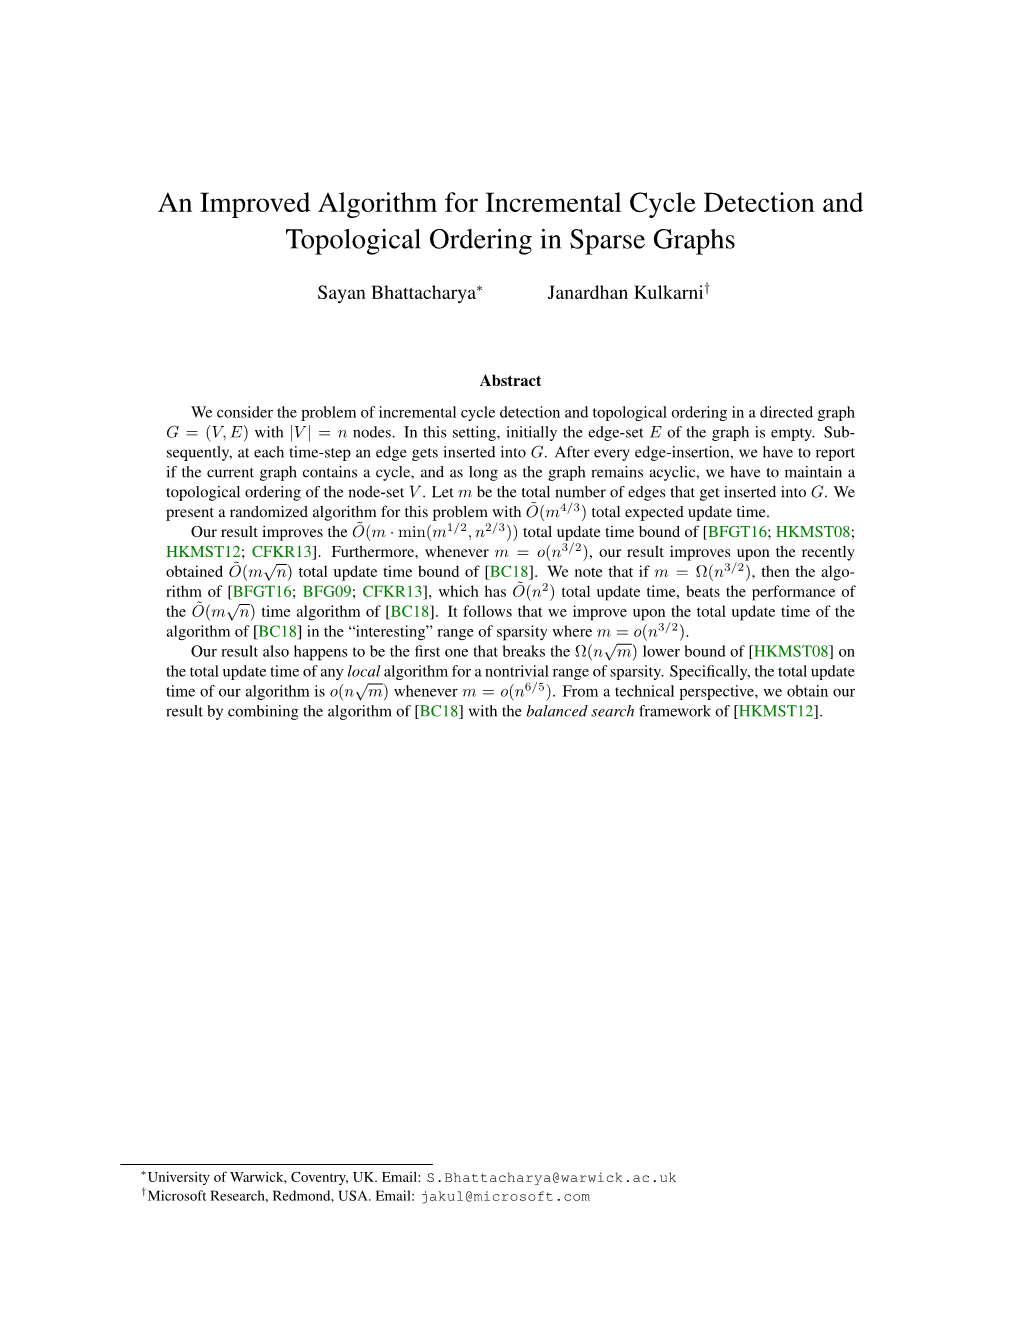 An Improved Algorithm for Incremental Cycle Detection and Topological Ordering in Sparse Graphs